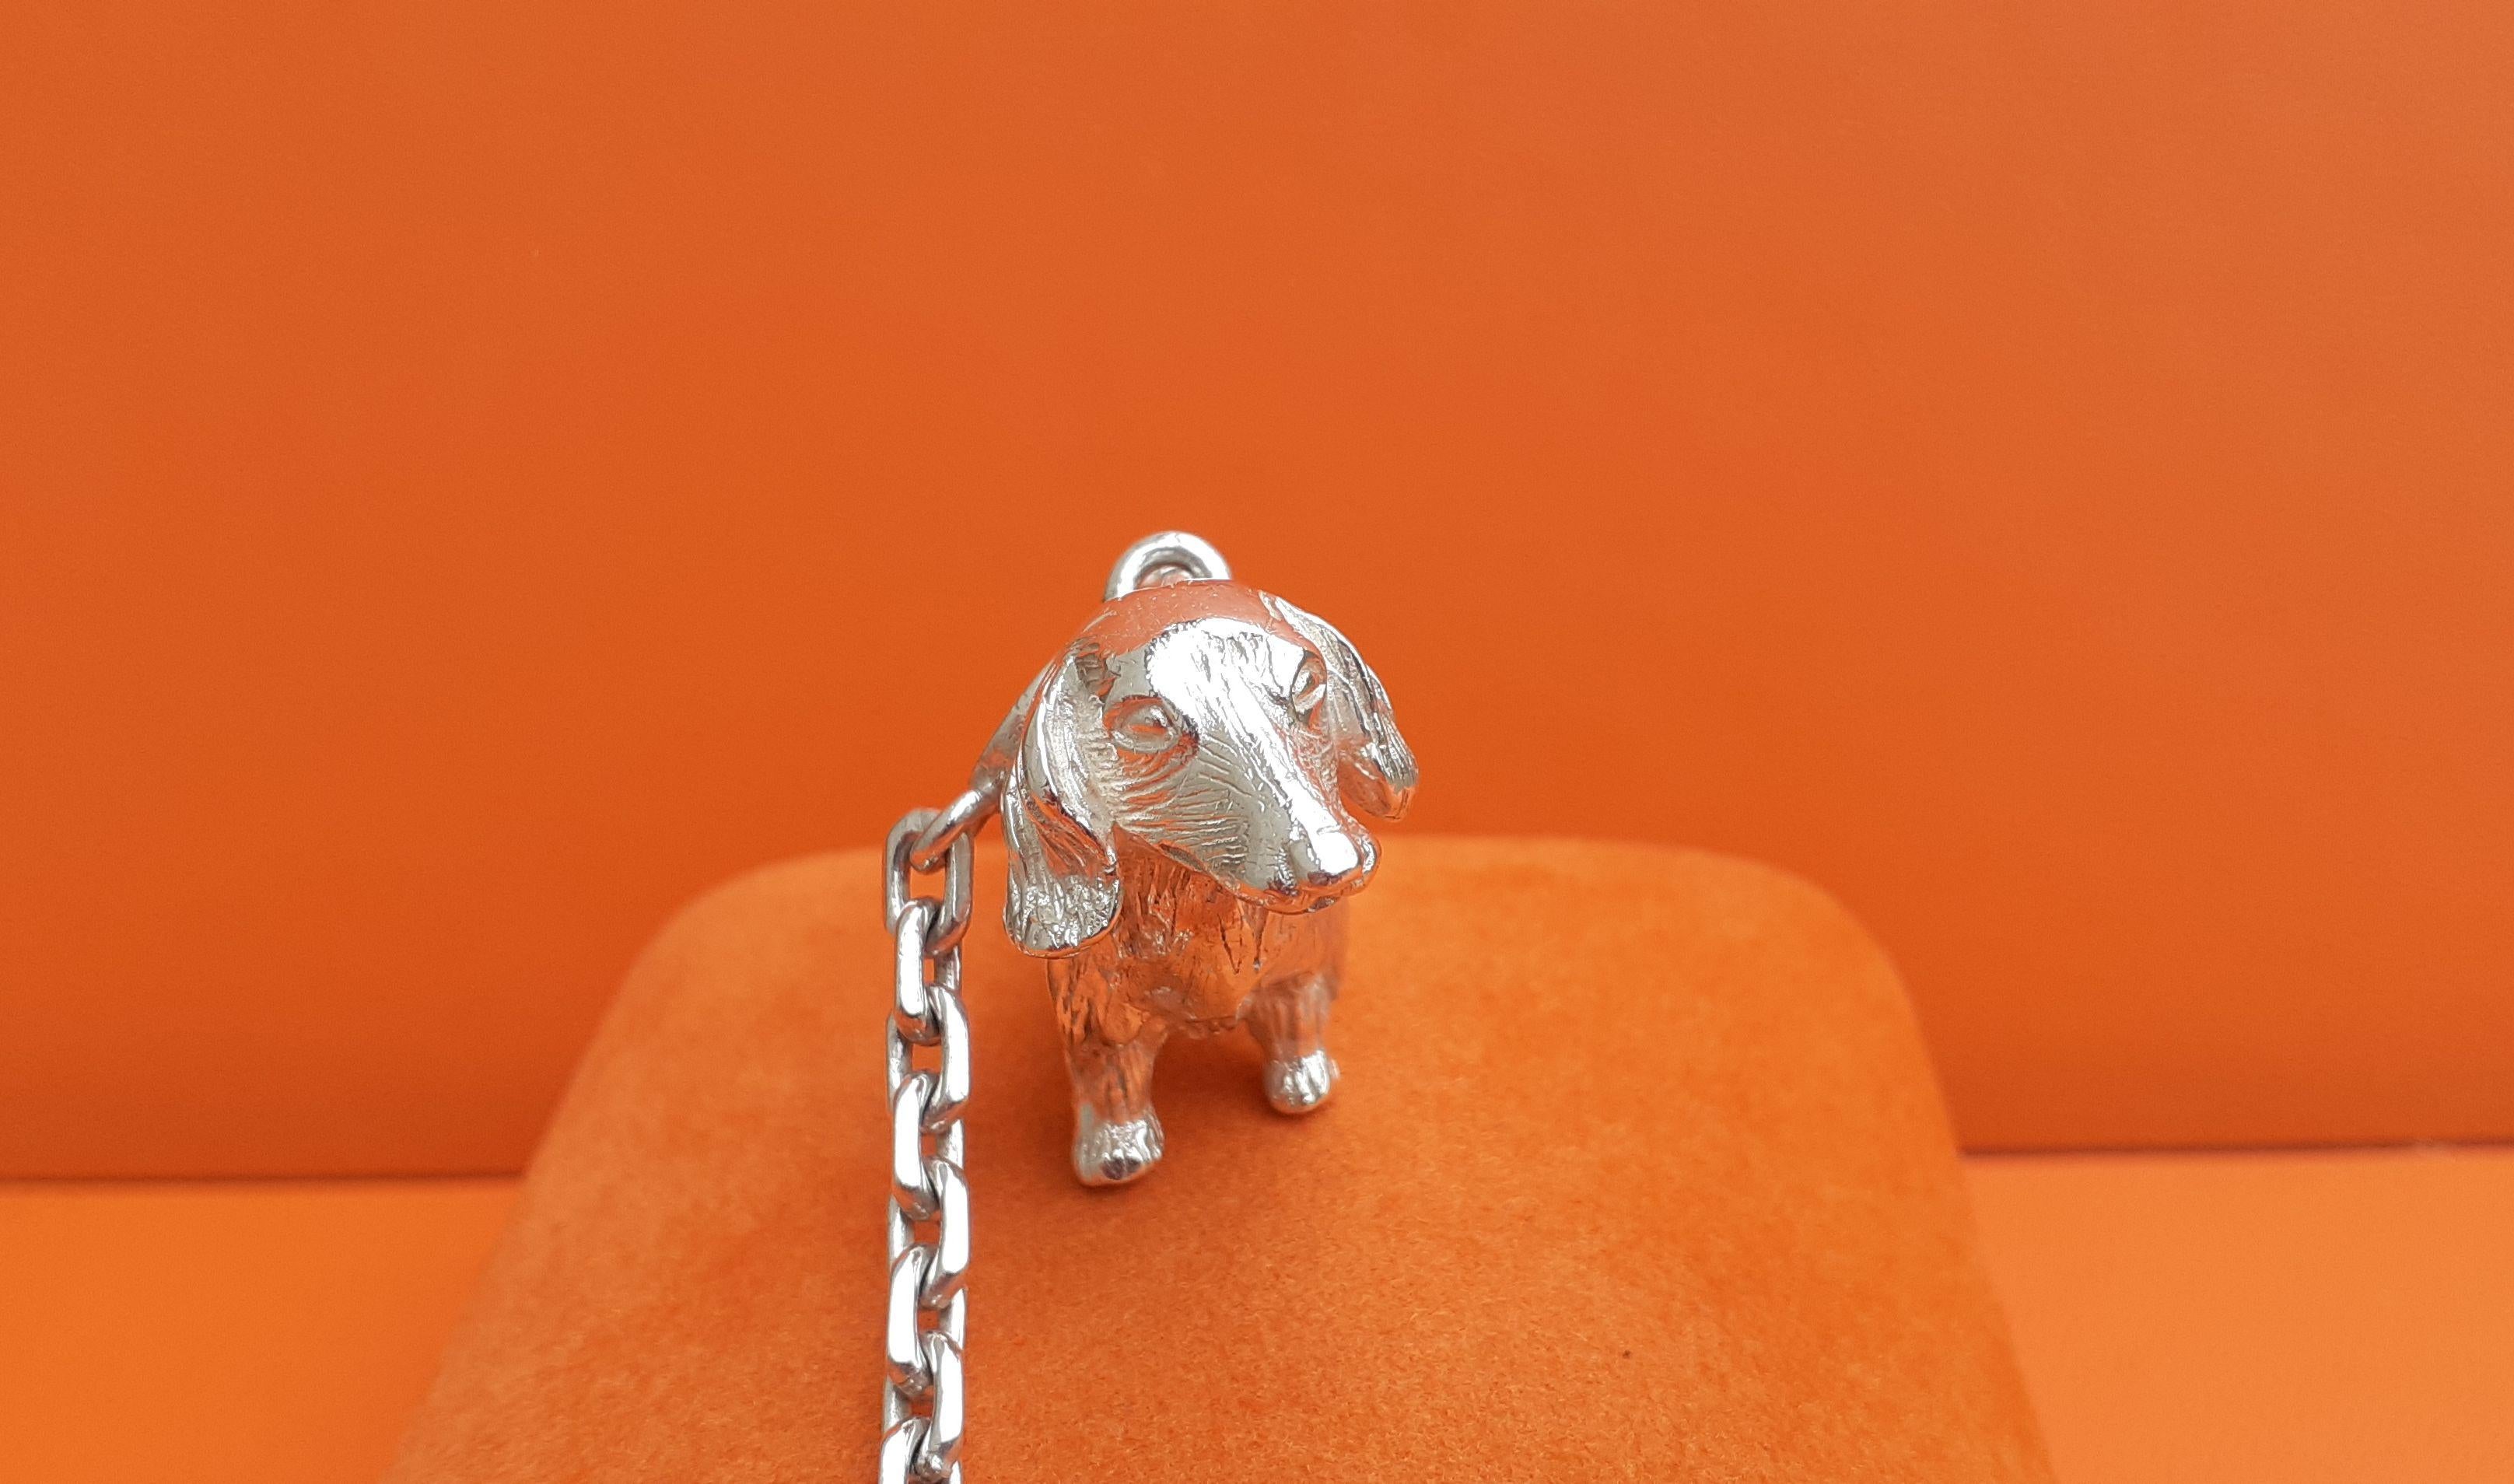 Extremely Rare and Cute Authentic Hermès Key Holder

In shape of a dachshund dog

Vintage item

Made in France (engraved on the edge of the main ring)

Made of silver

Colorway: silvery

